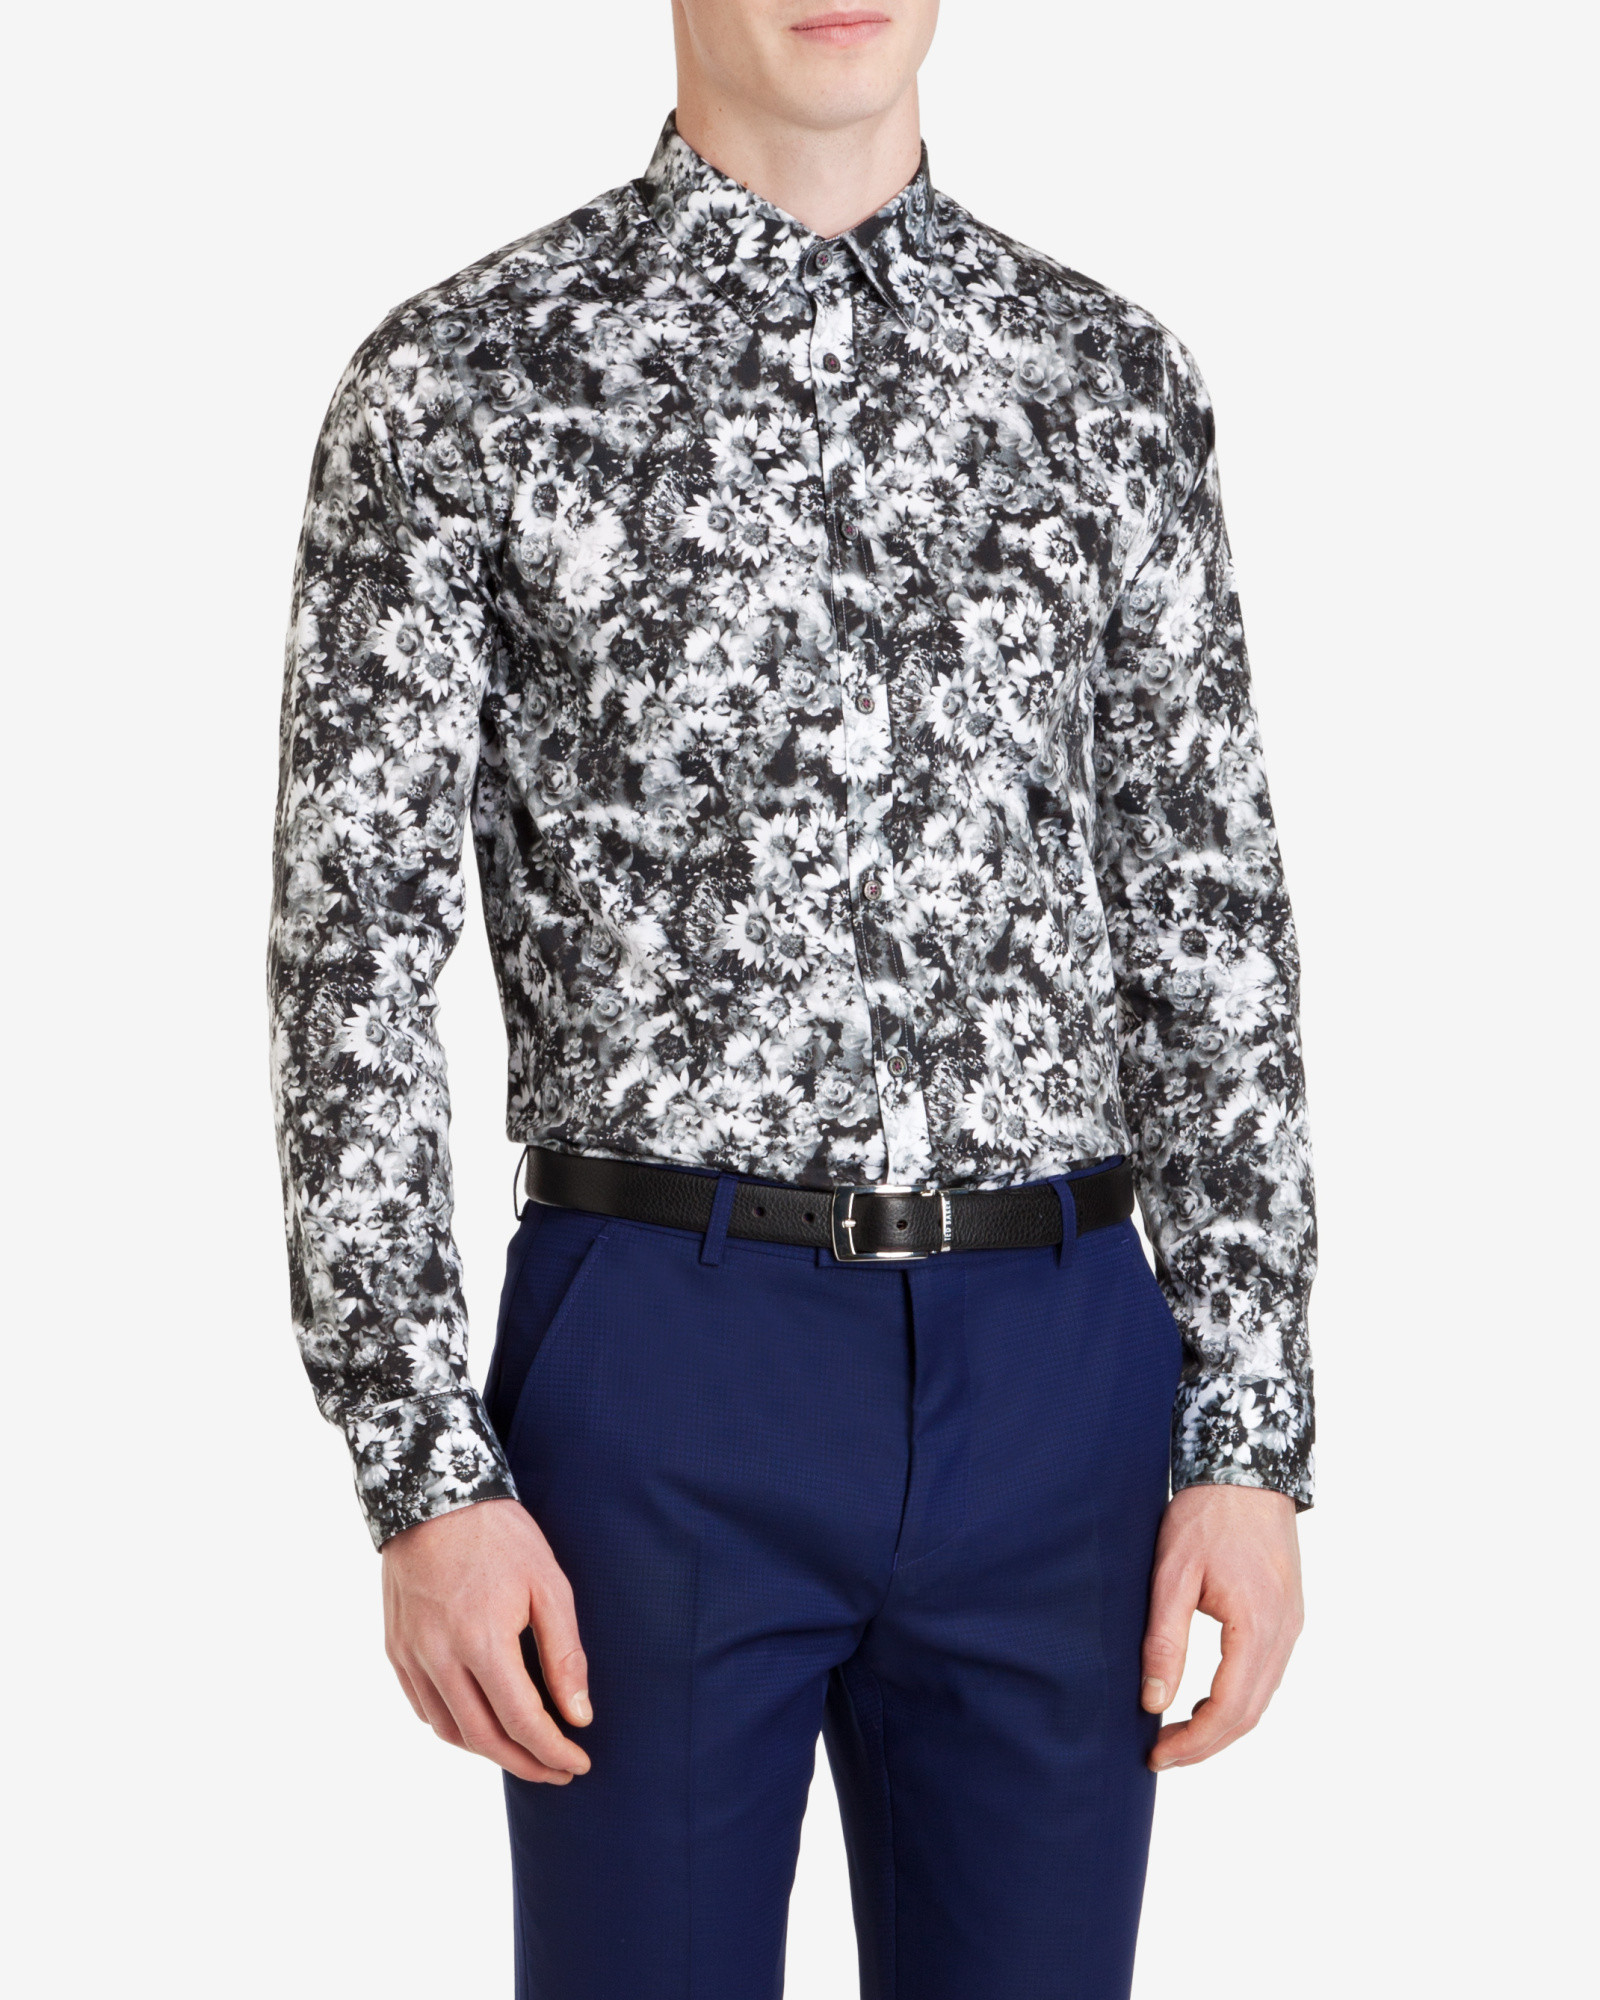 Lyst - Ted Baker Printed Floral Shirt in White for Men